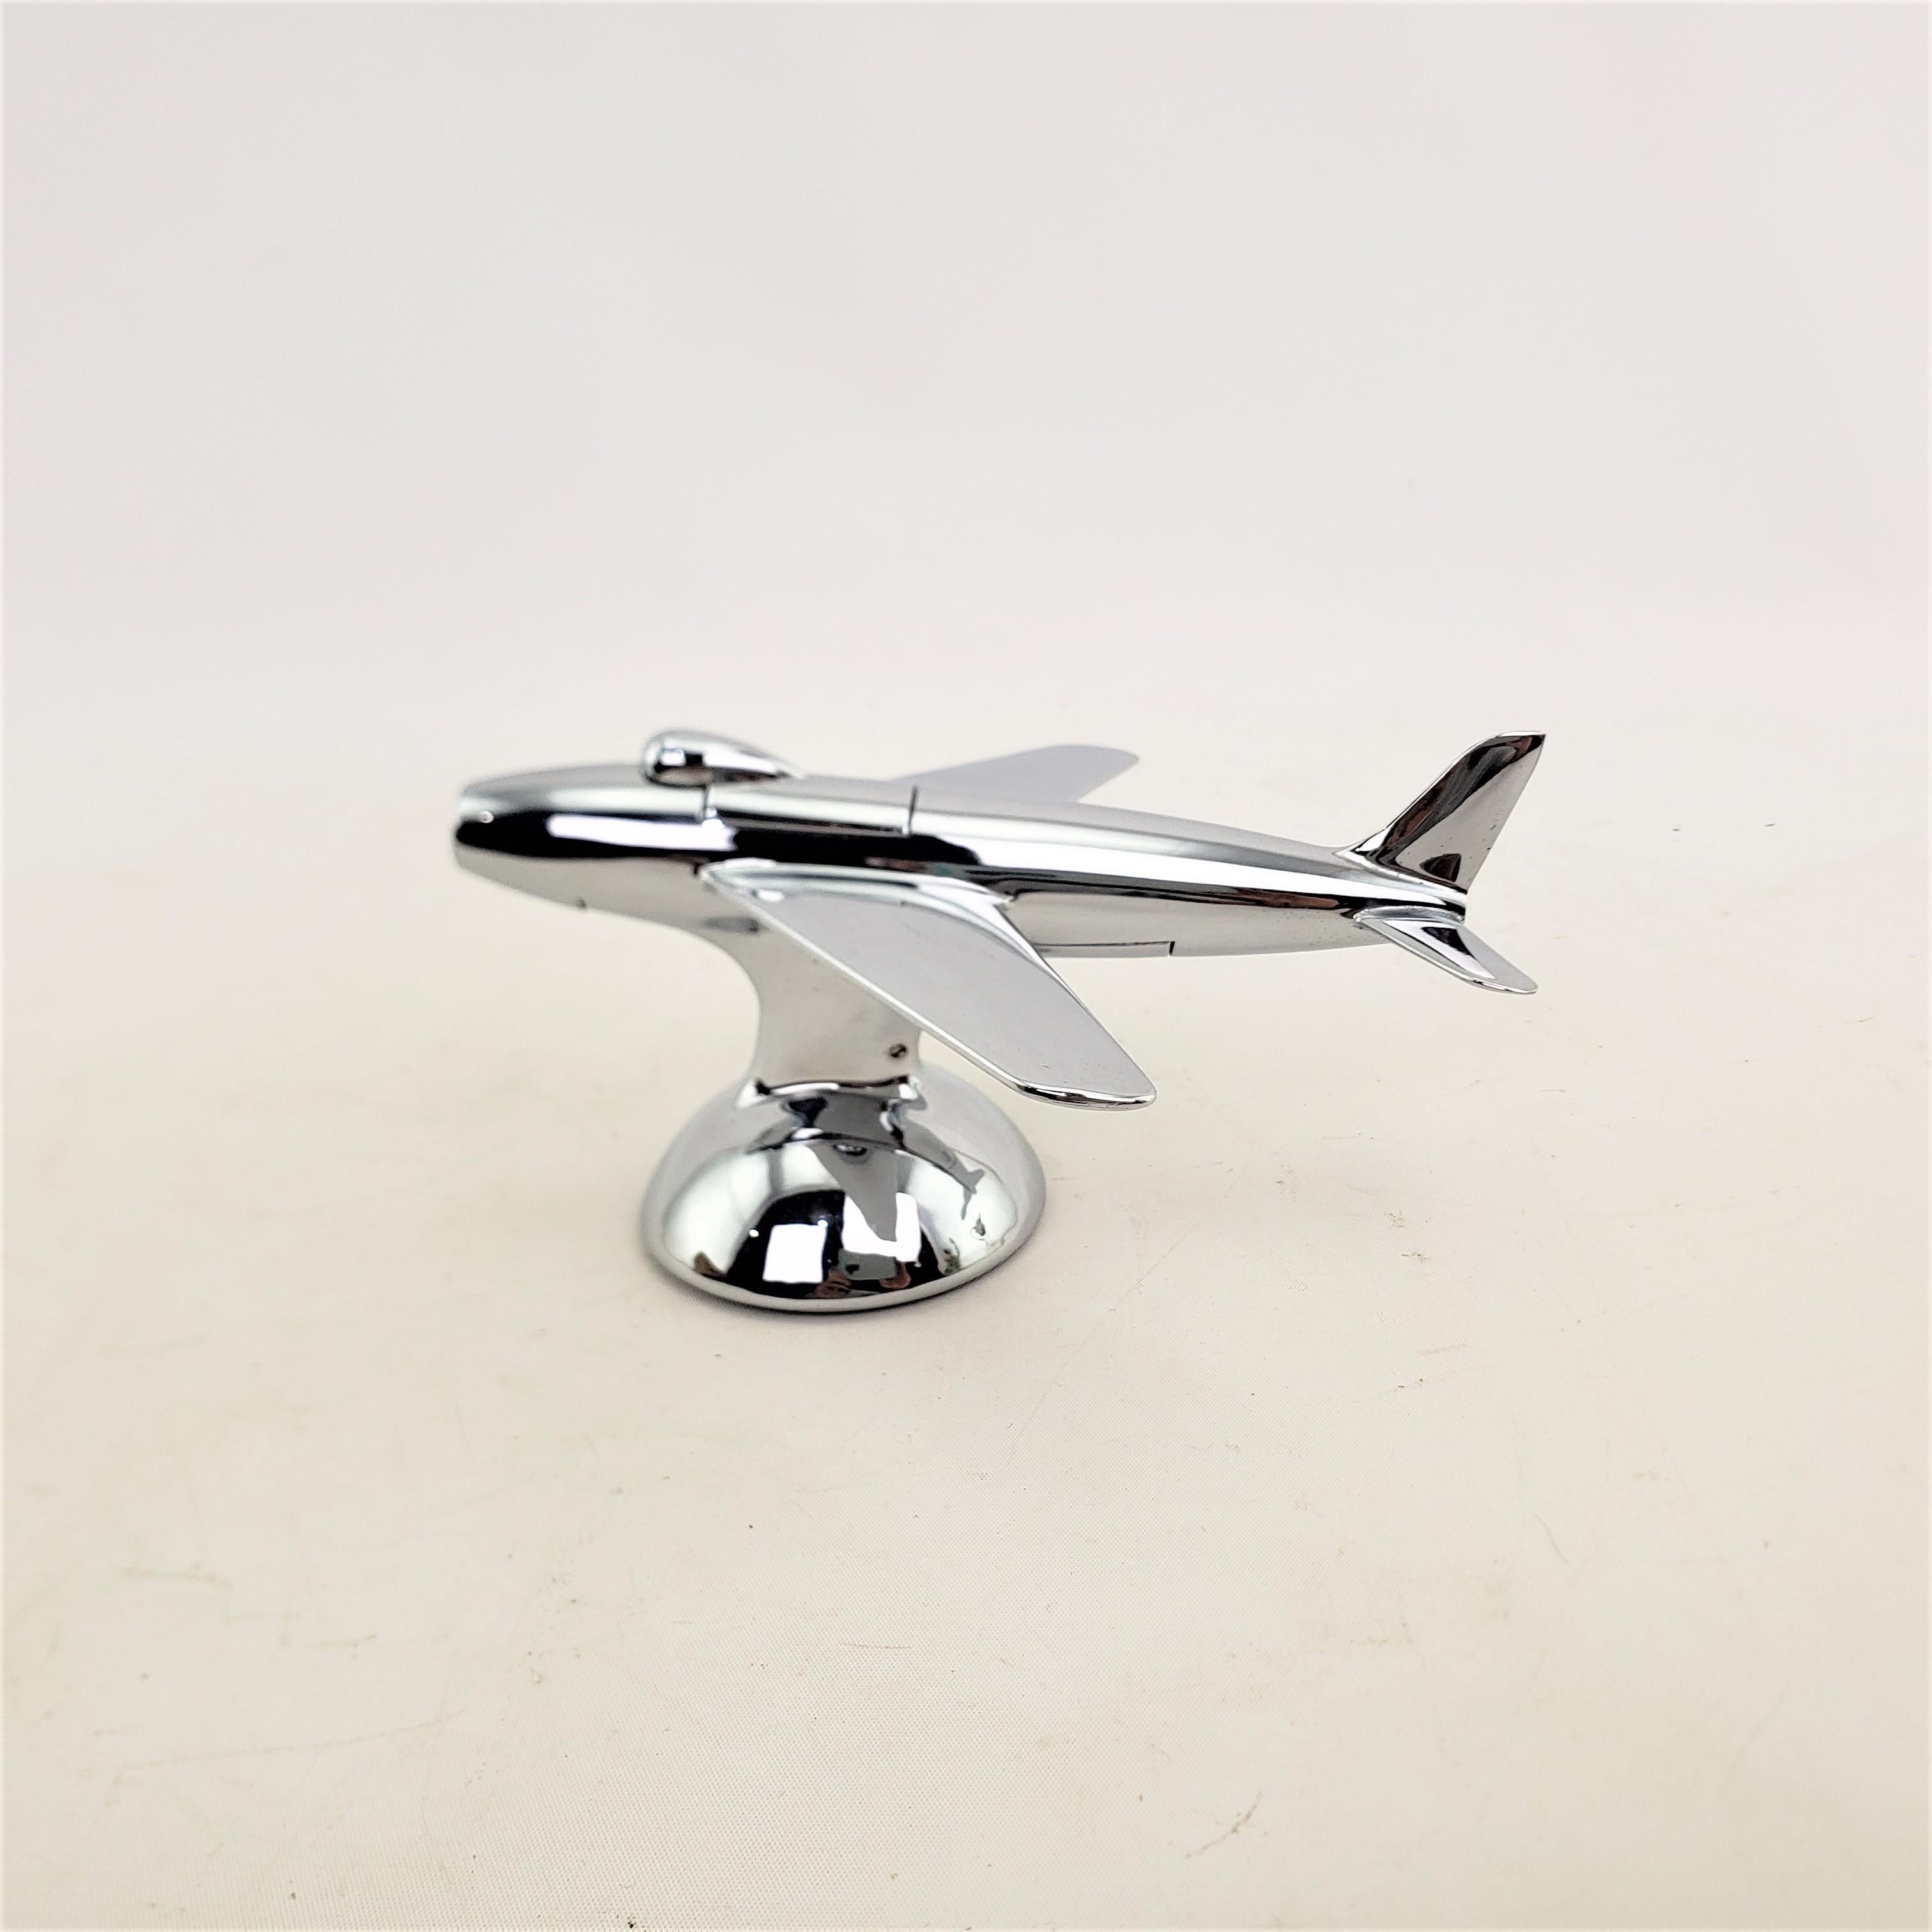 English Dunhill Mid-Century Modern Chrome Stylized Sabre Jet Airplane Table Lighter For Sale